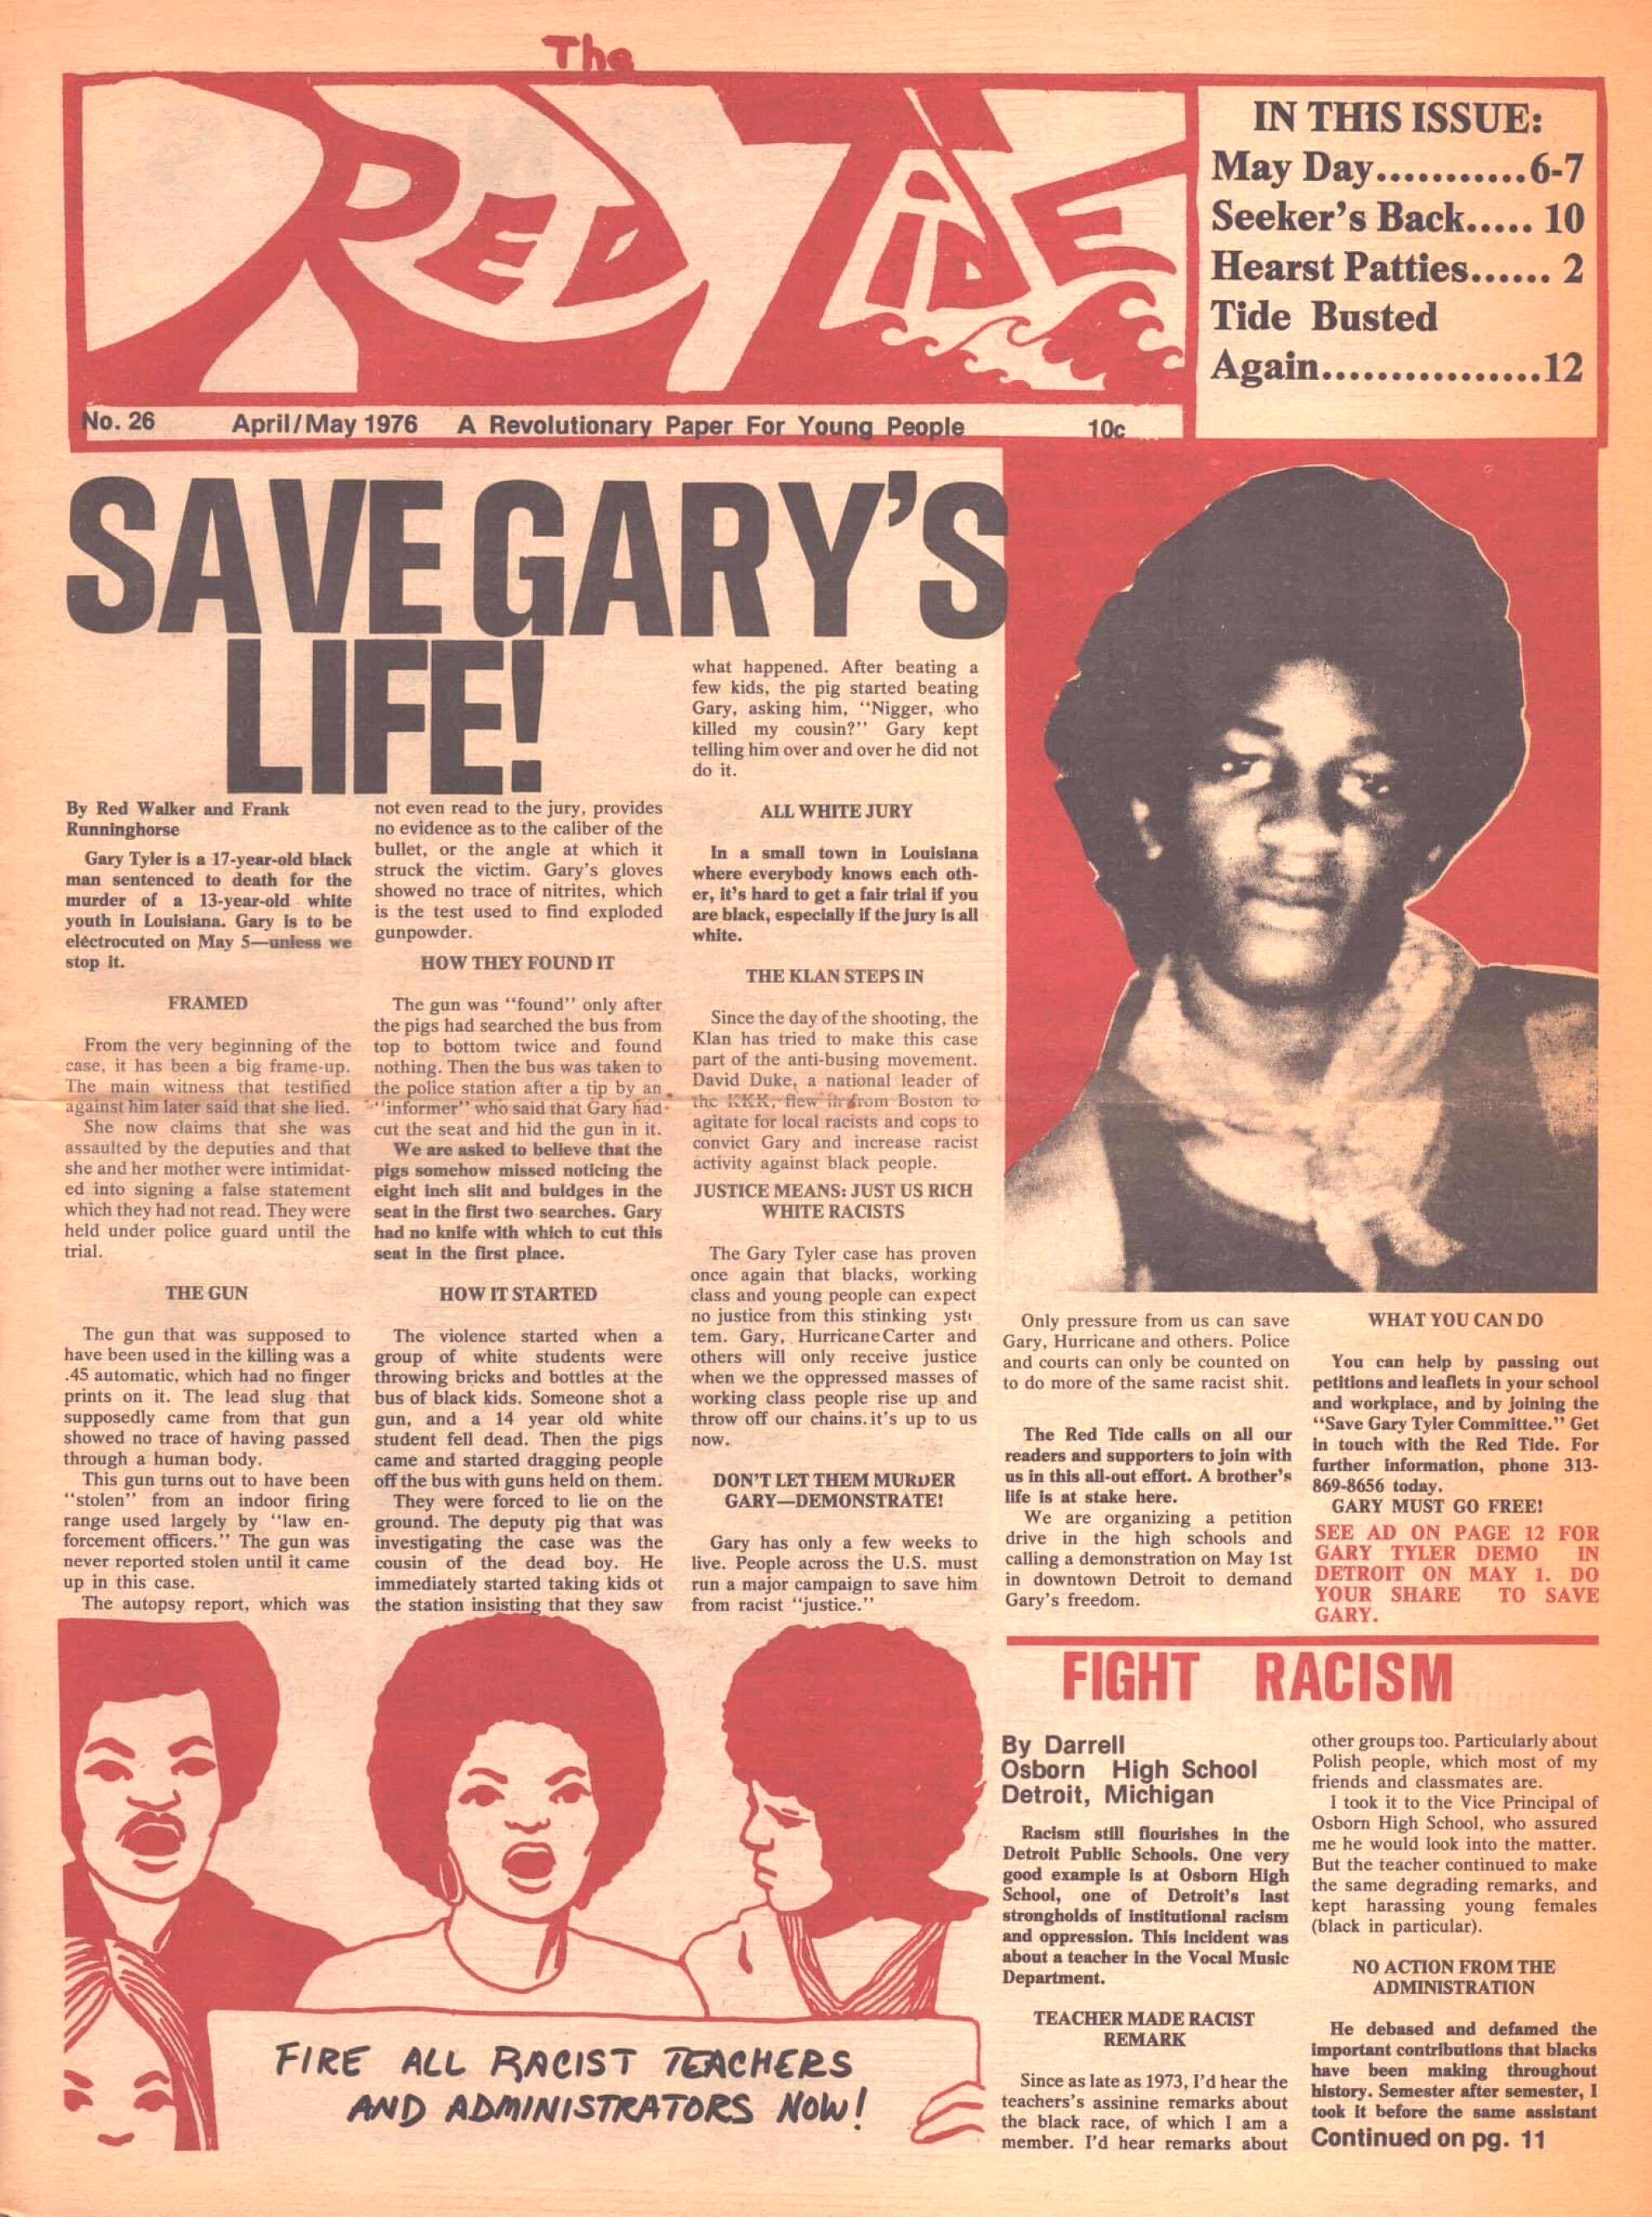 A 1976 front page of the Red Tide with a headline saying: "Save Gary's life"